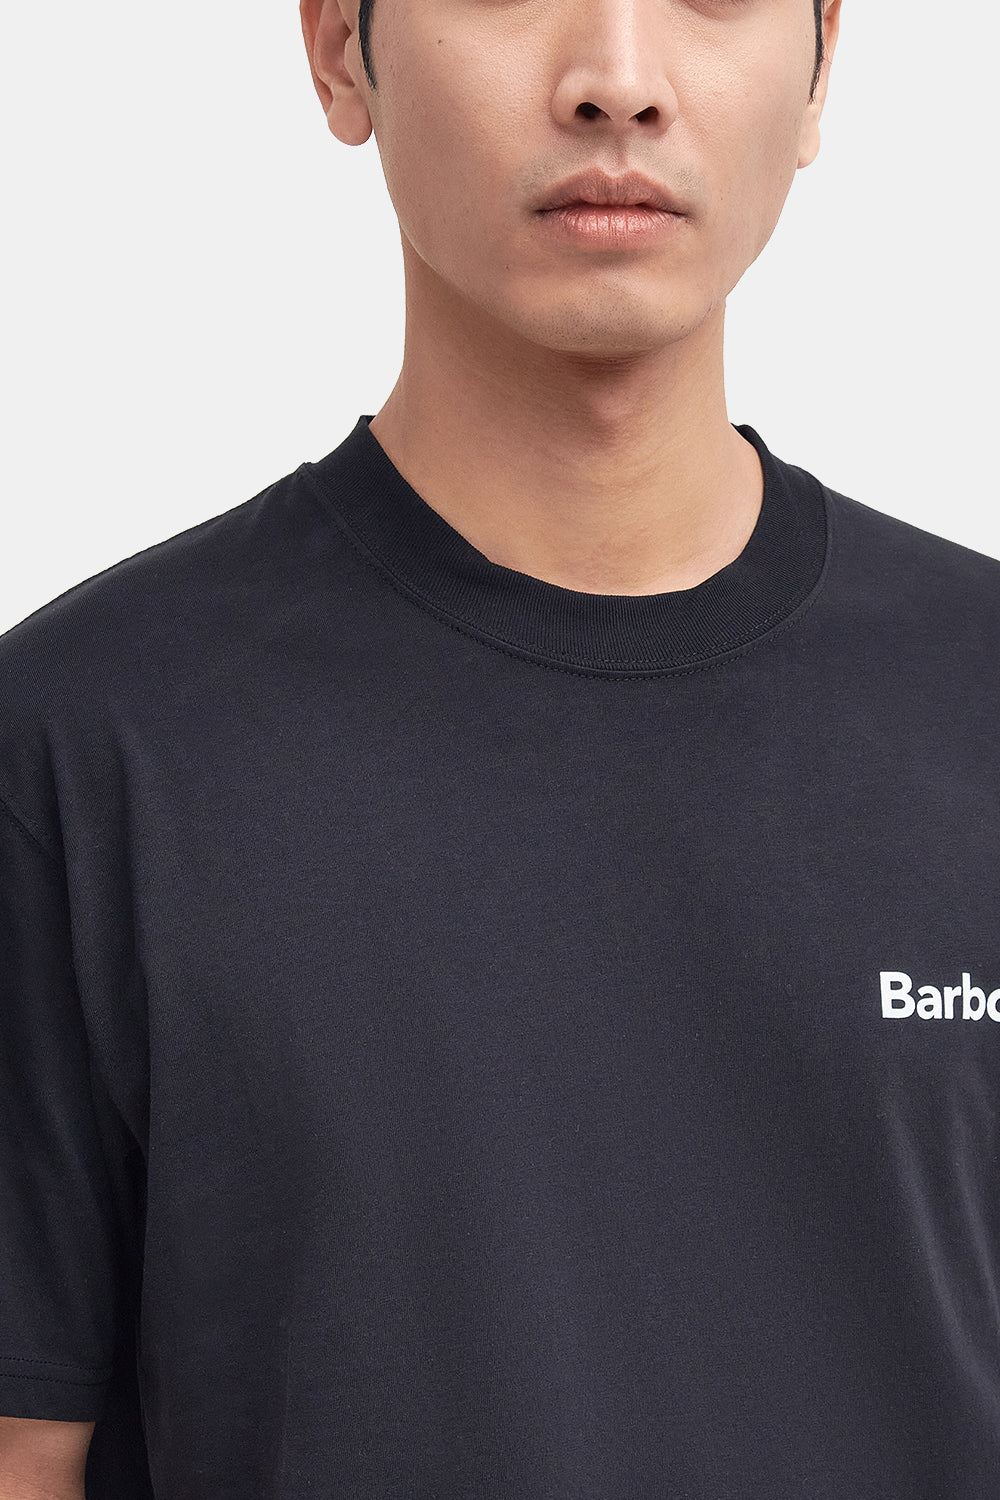 Barbour Stowell T-Shirt (Black)
